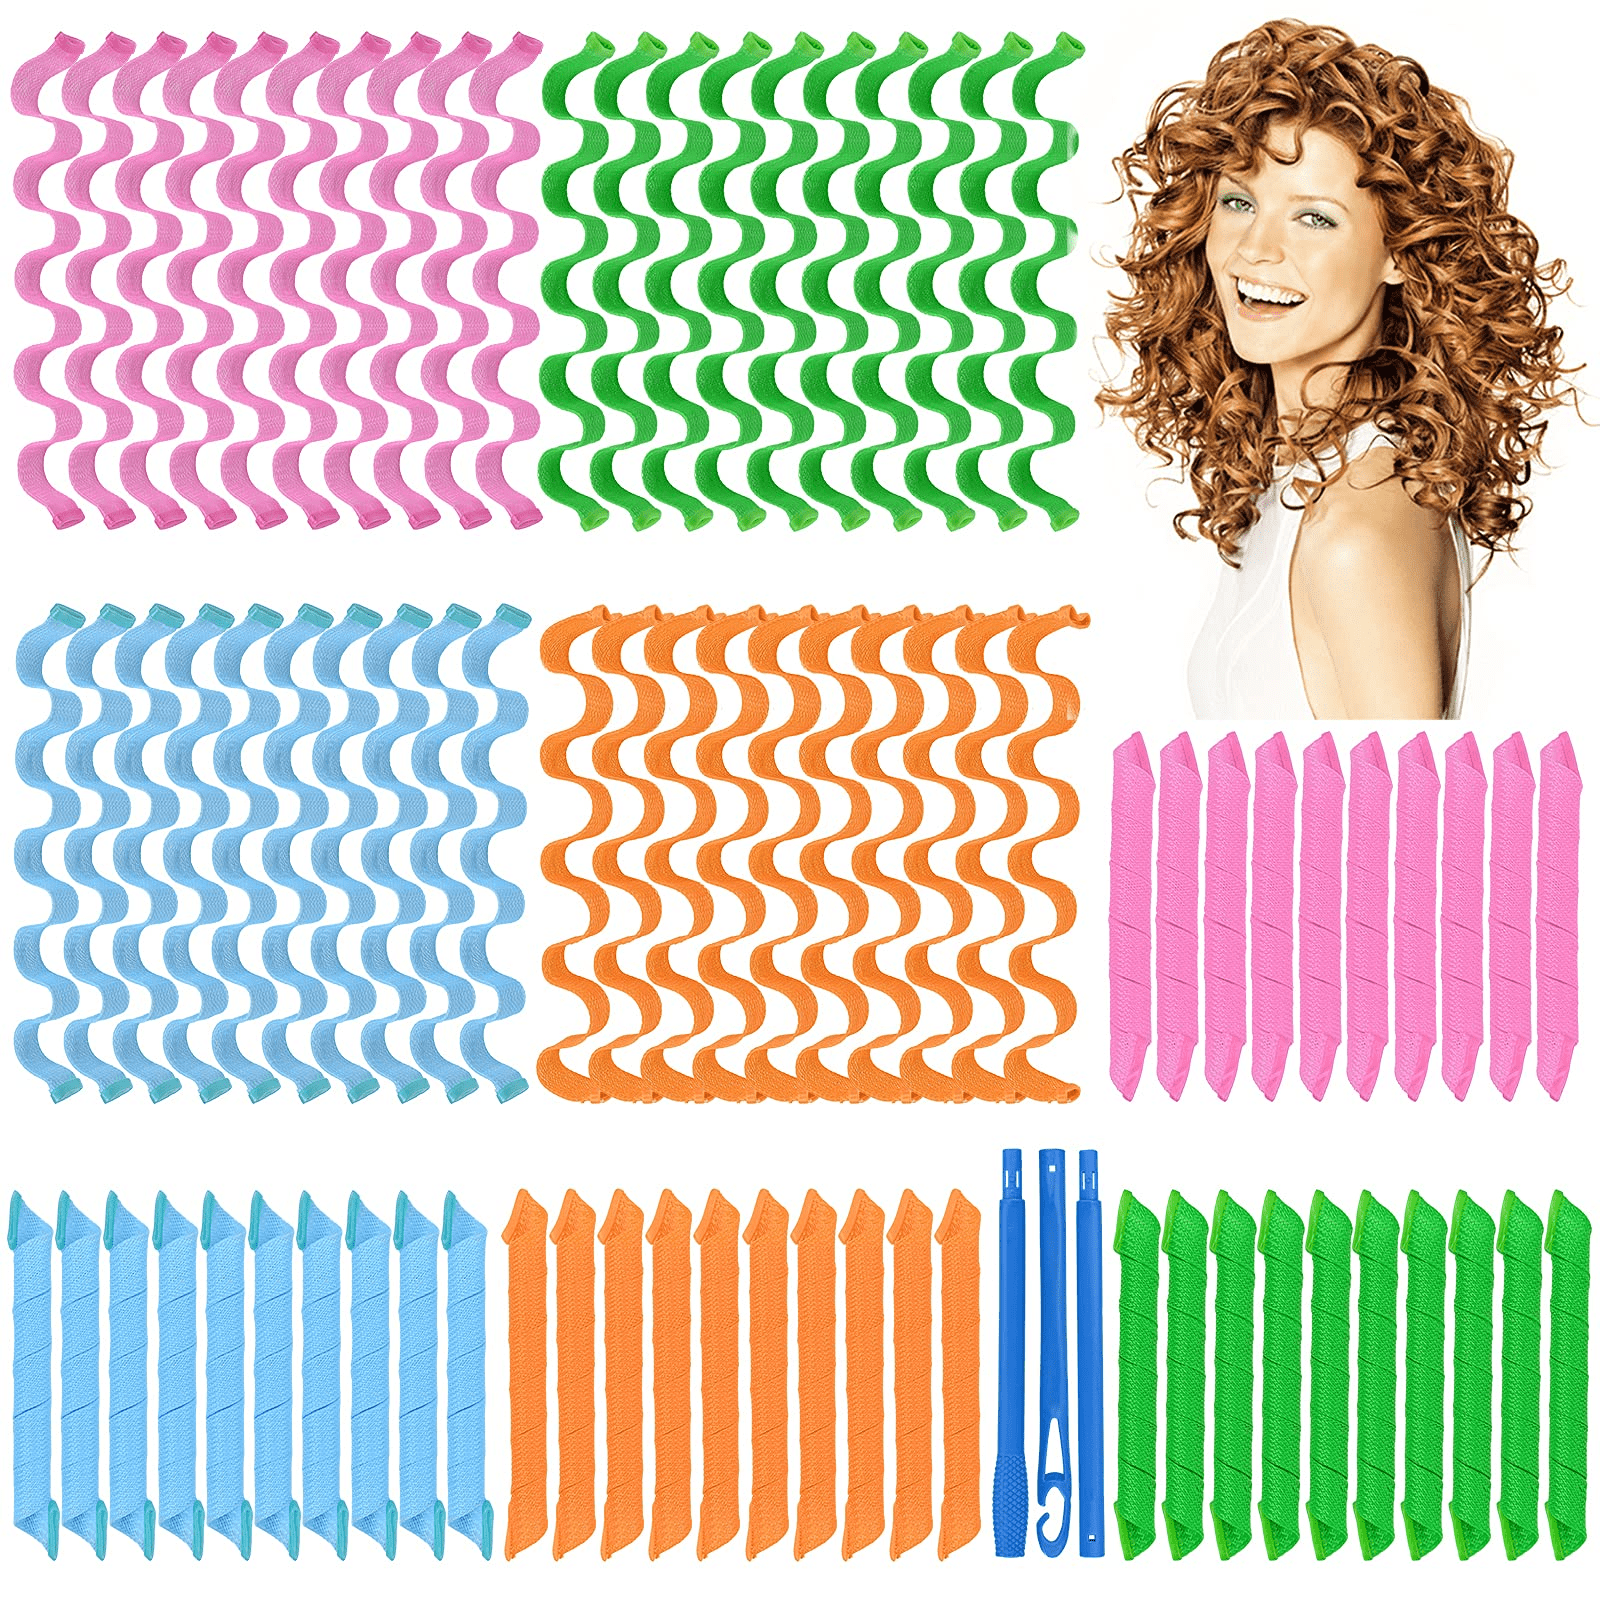 Buy 80 Pieces Hair Curlers Spiral Curls Wave Hair Curlers Styling Kit, Spiral  Hair Roller No Heat DIY Wave Hair Curlers with Styling Hook for Women Long Hair  Hairstyle Styling 45 